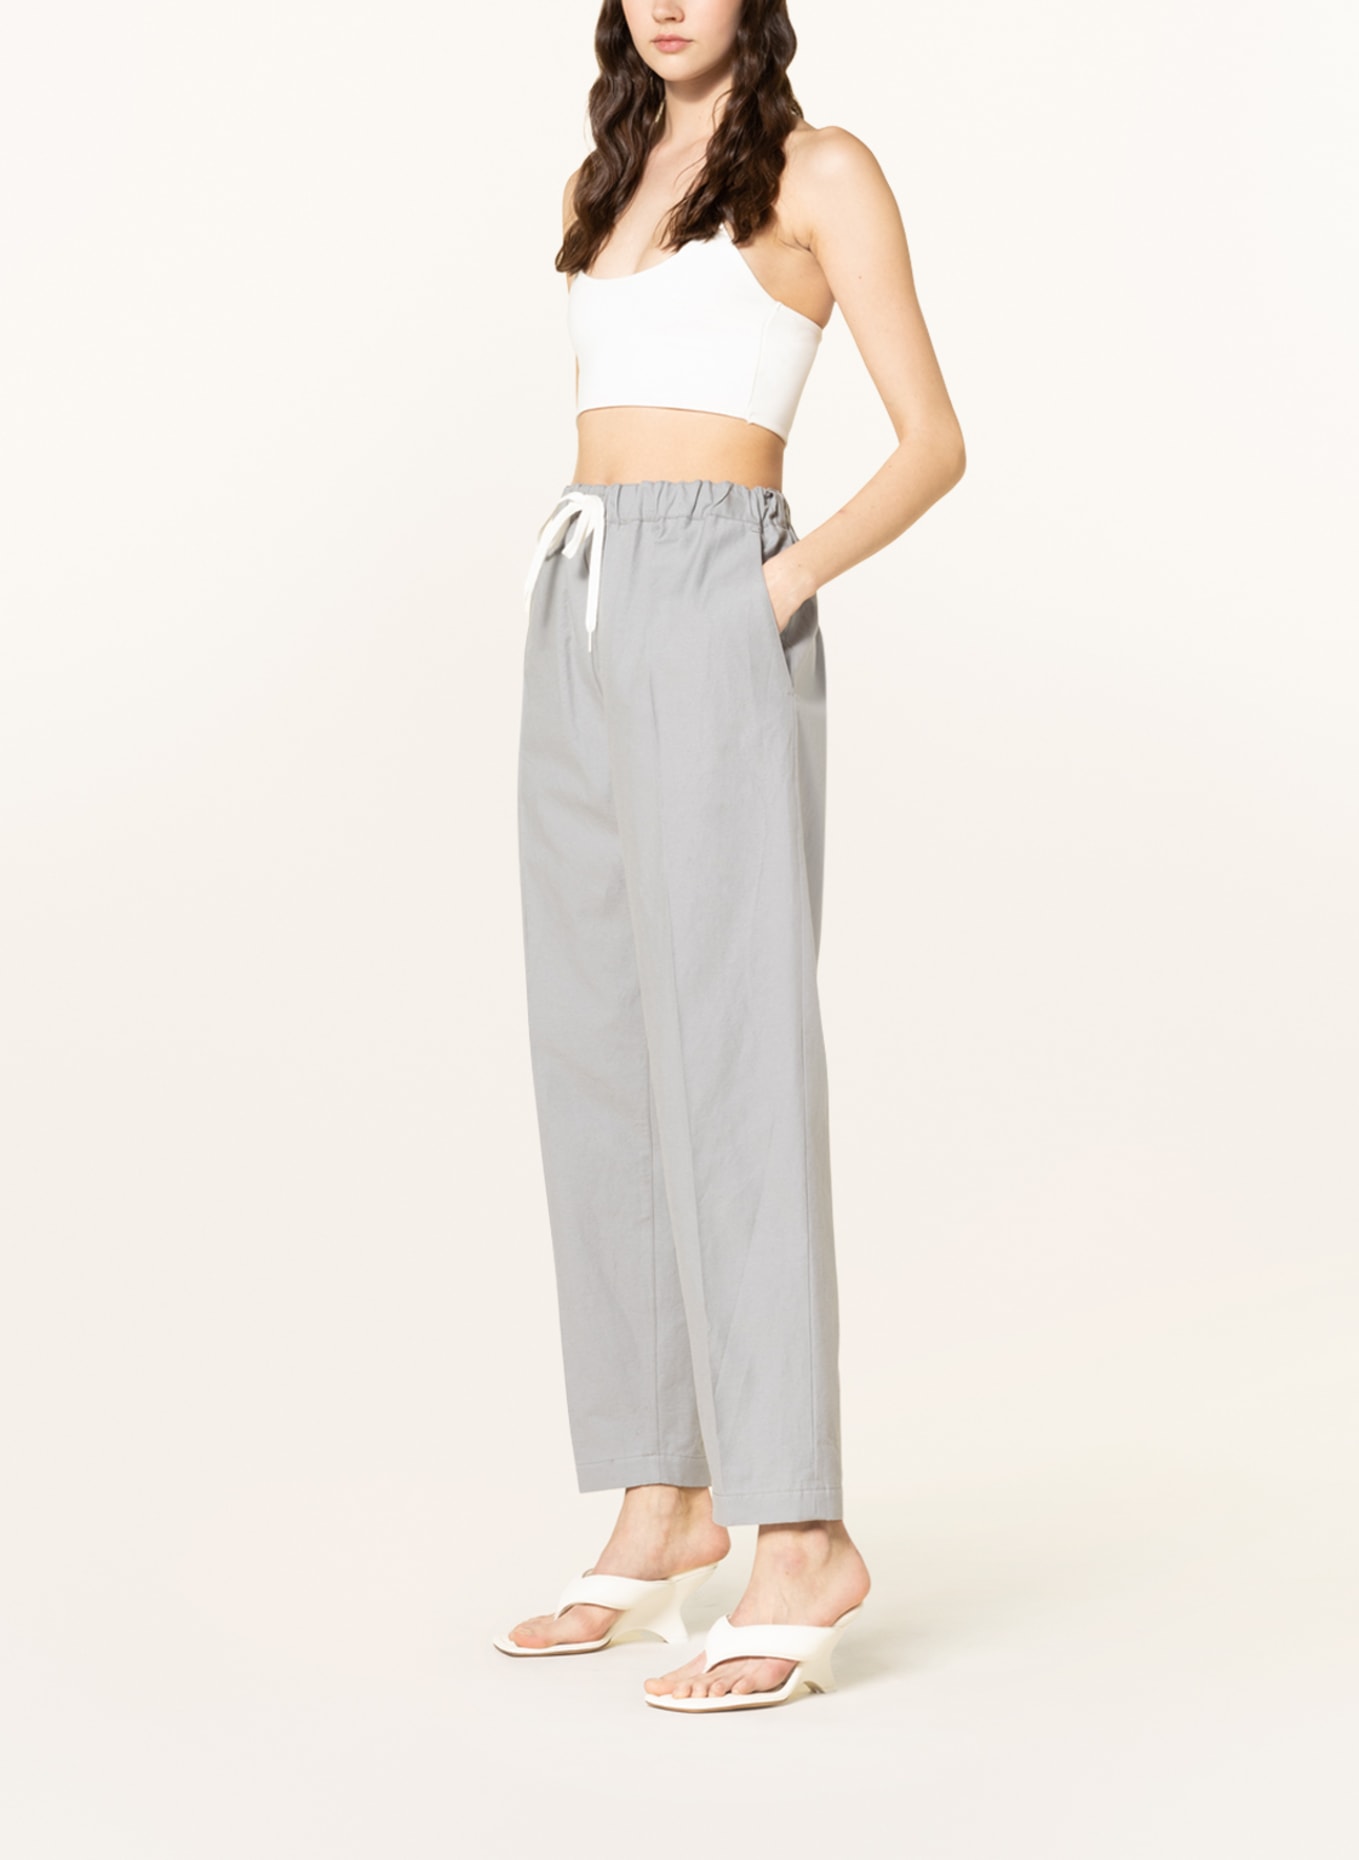 MM6 Maison Margiela Pants in jogger style, Color: LIGHT GRAY (Image 2)